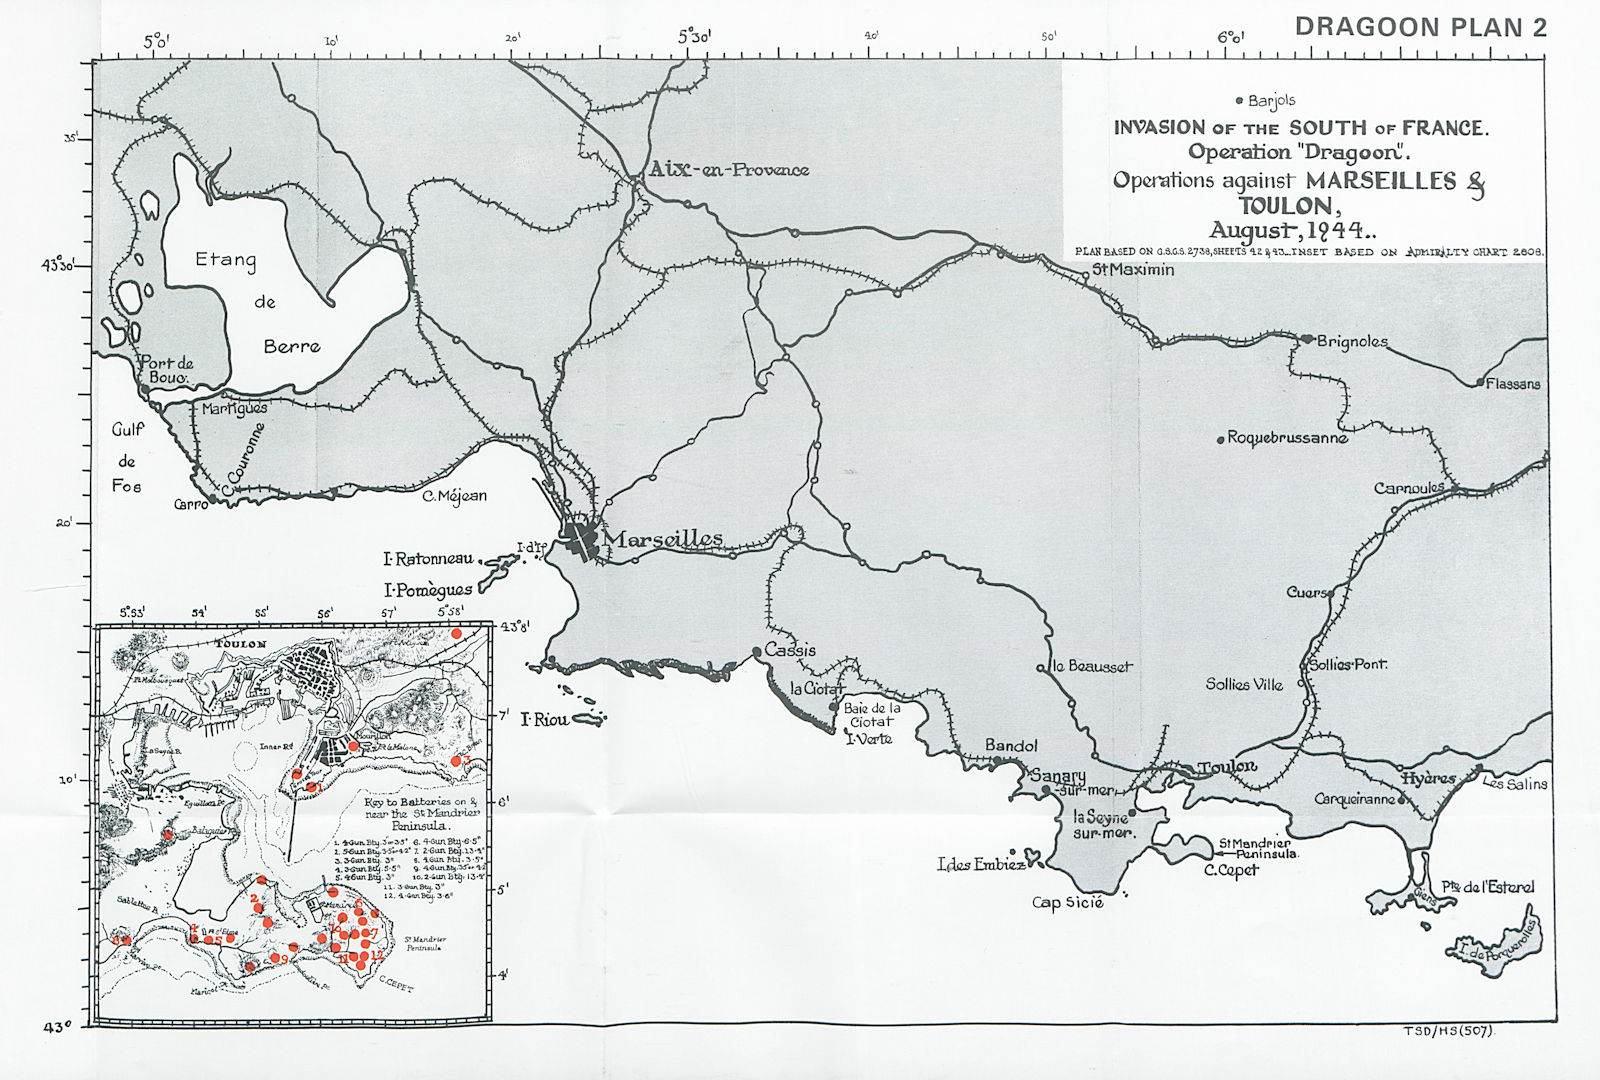 Associate Product South of France invasion. Operation Dragoon. Marseilles Toulon Aug 1944 1994 map